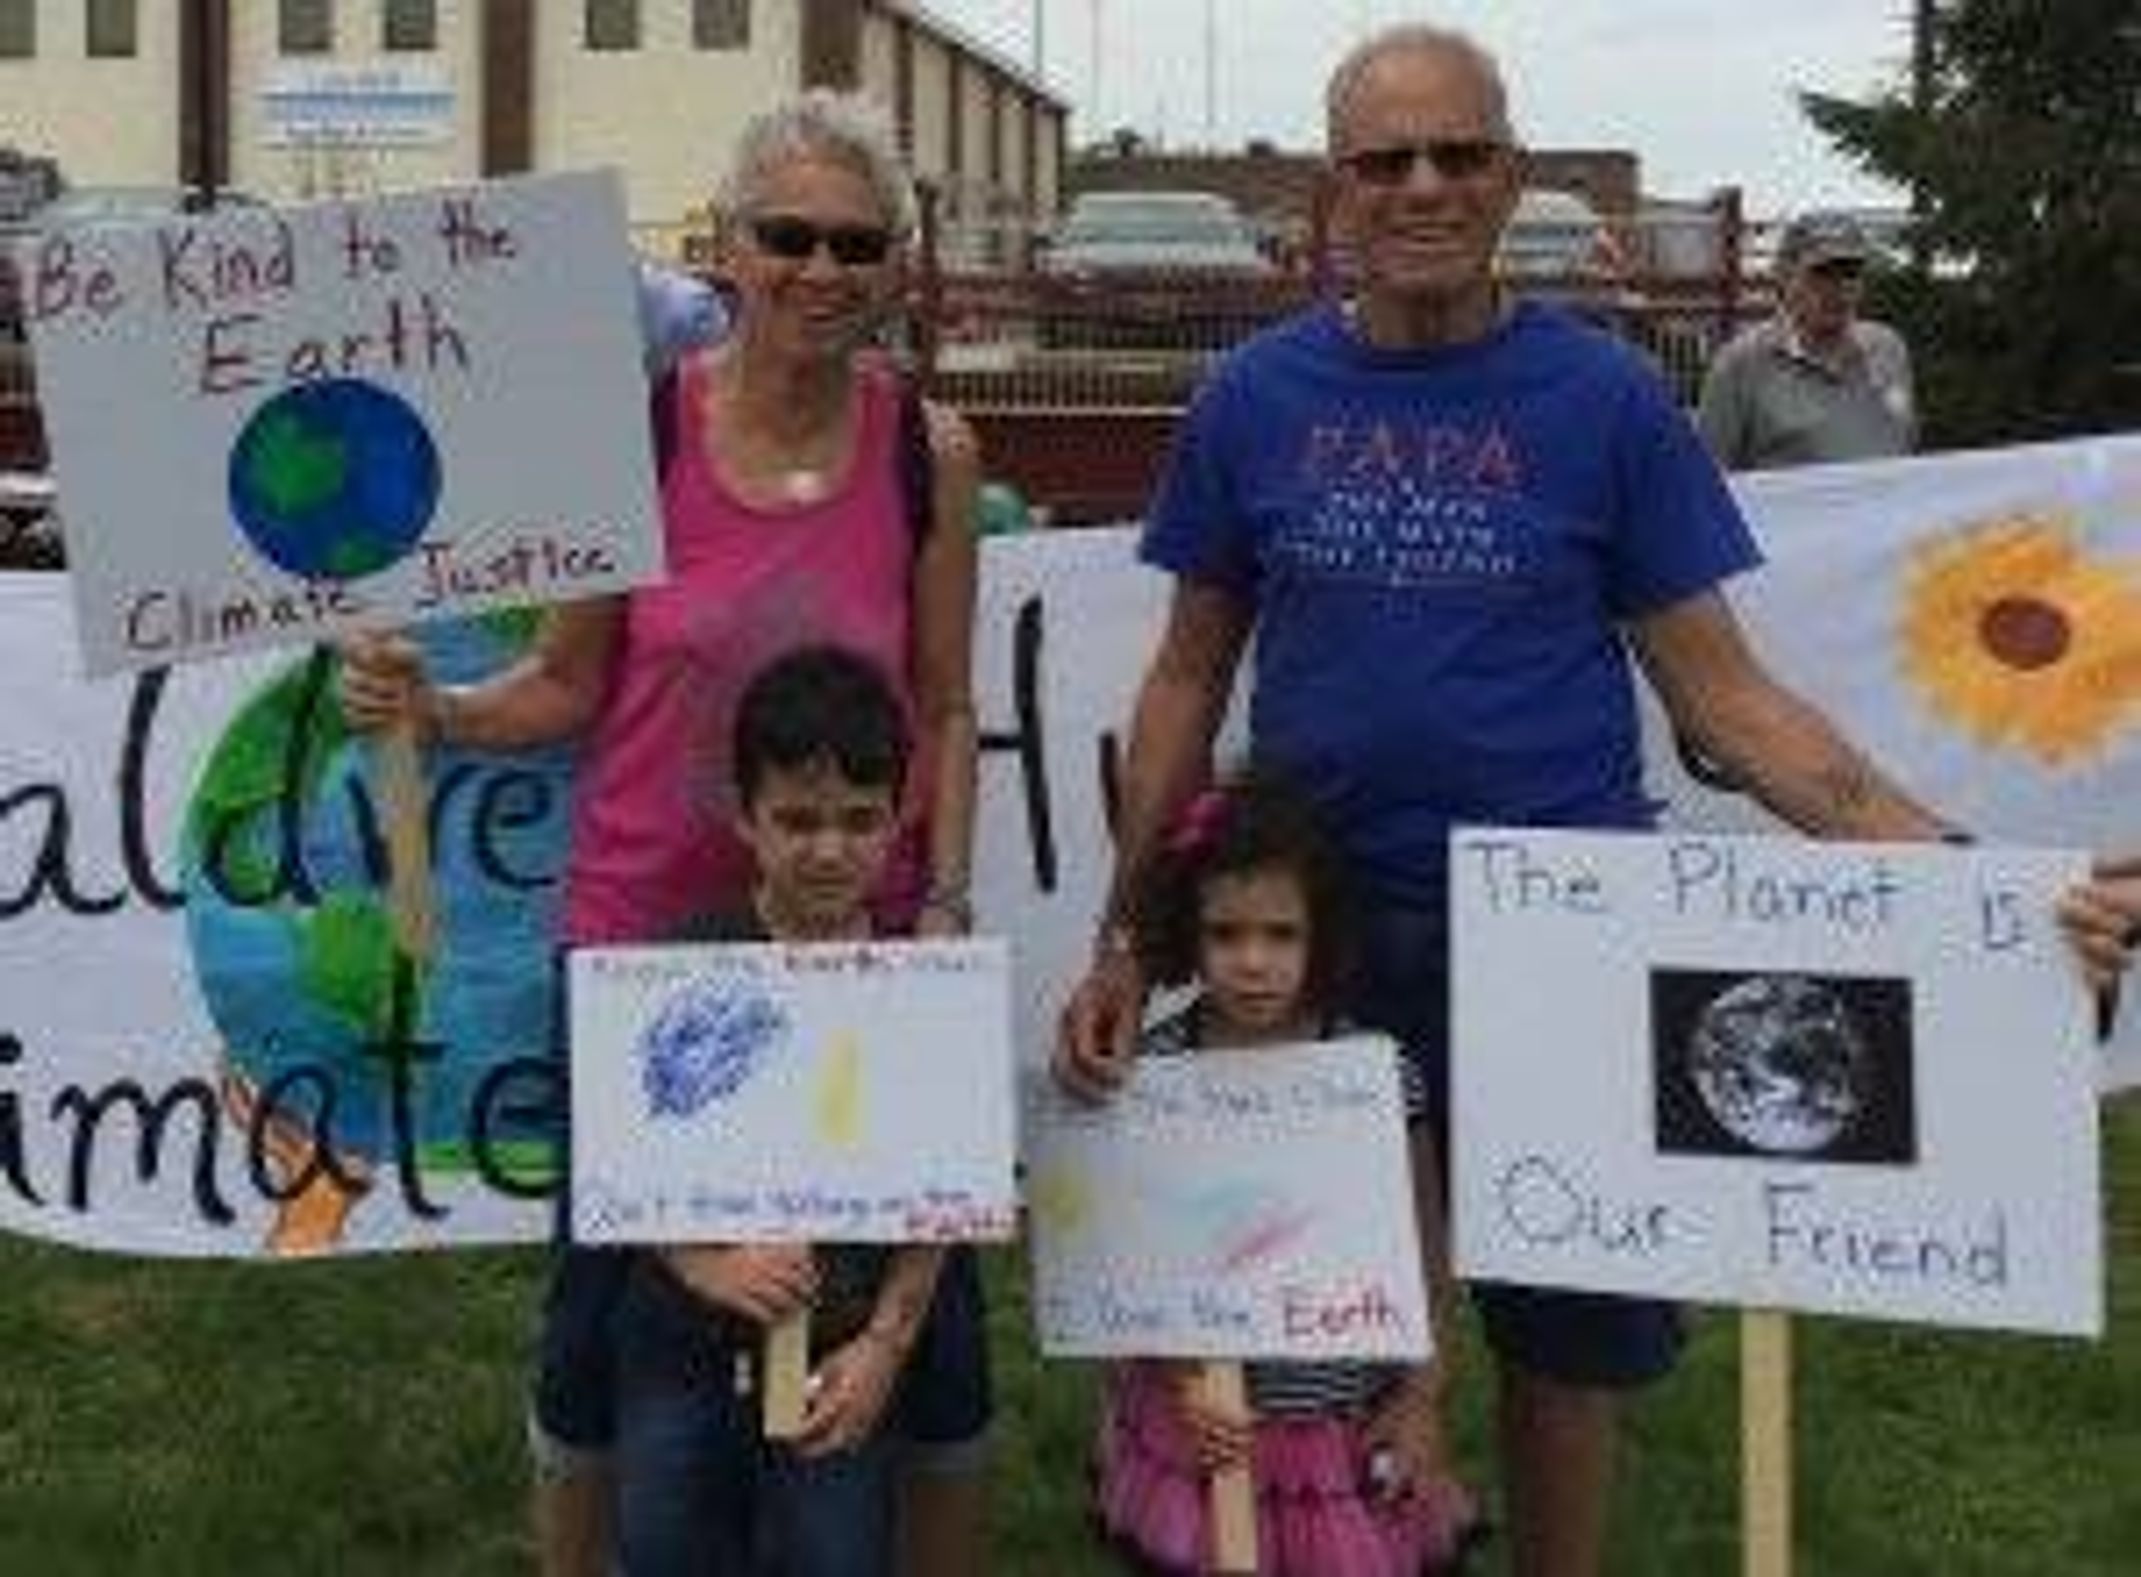 Barry and Claire Nelson at a march with their grandkids